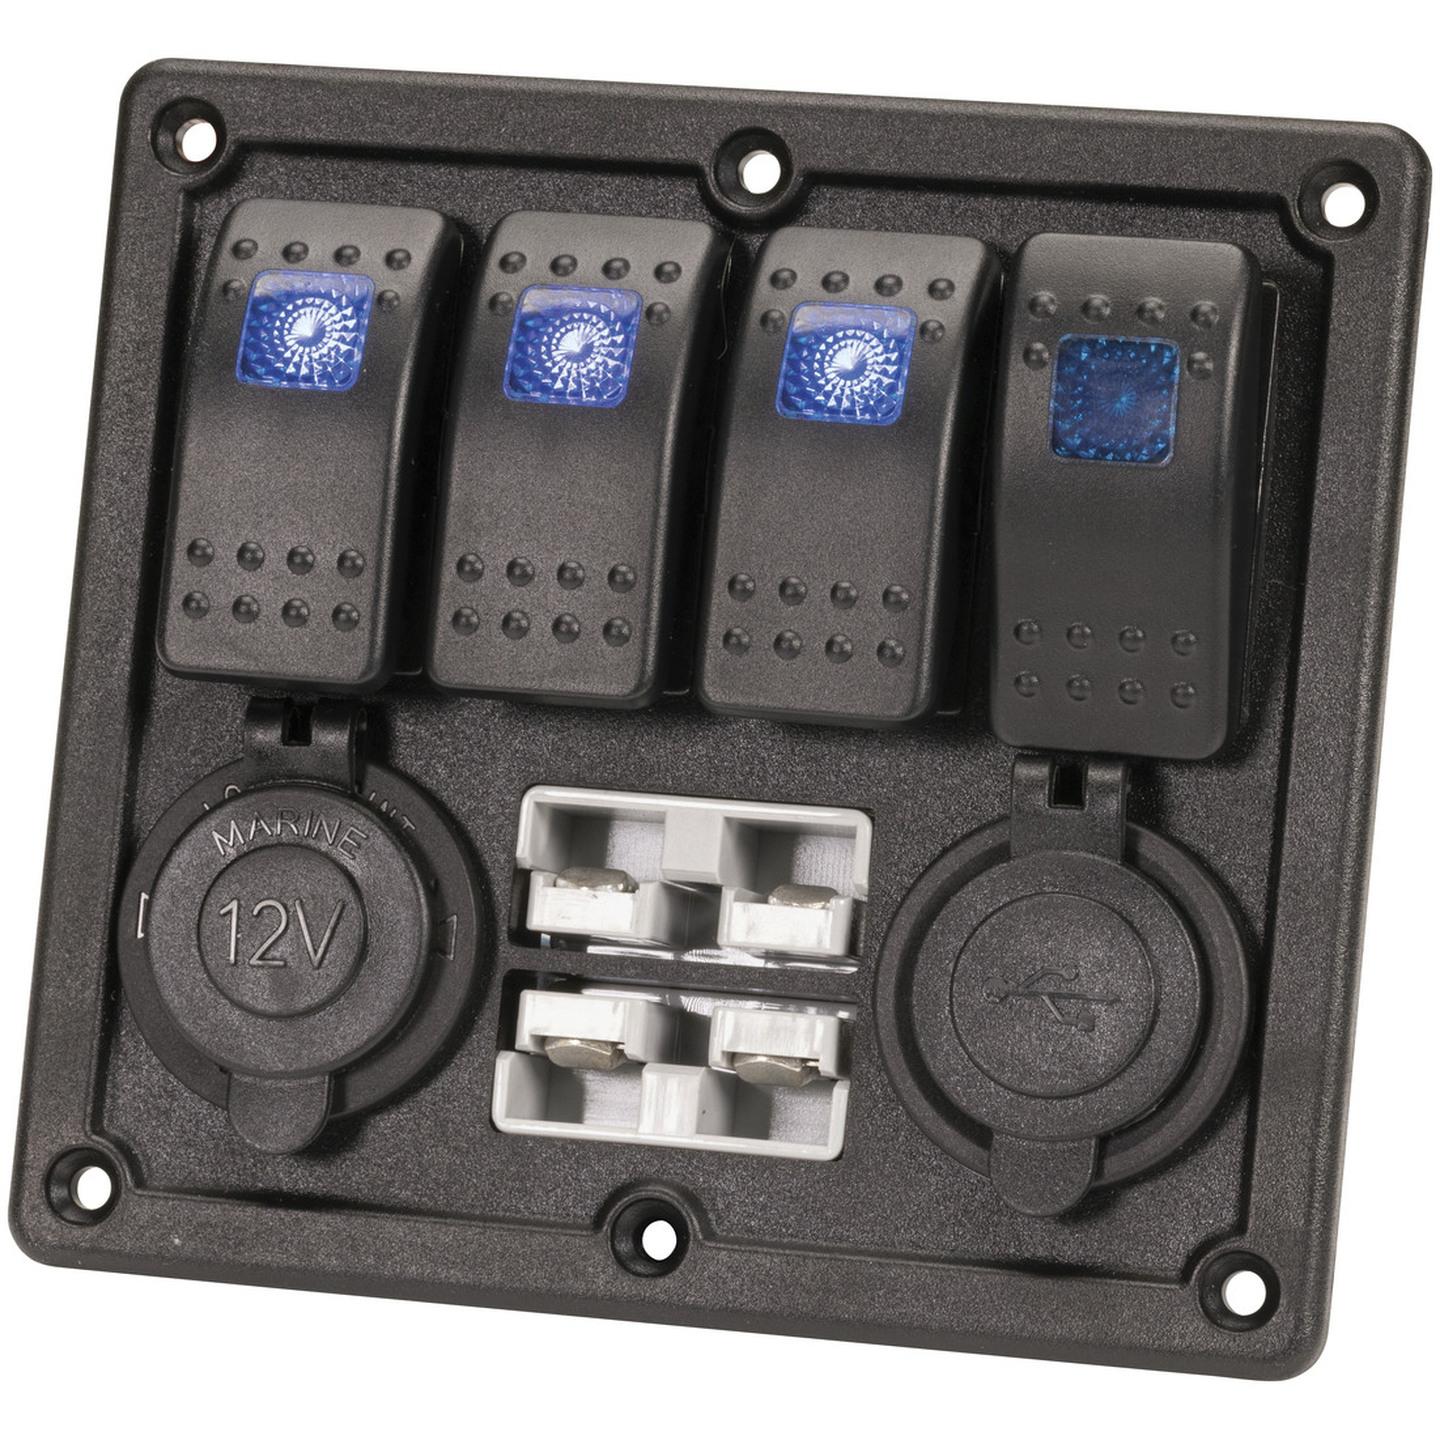 4 Way Illuminated Switch Panel With USB 12V and 2 x Battery Plugs